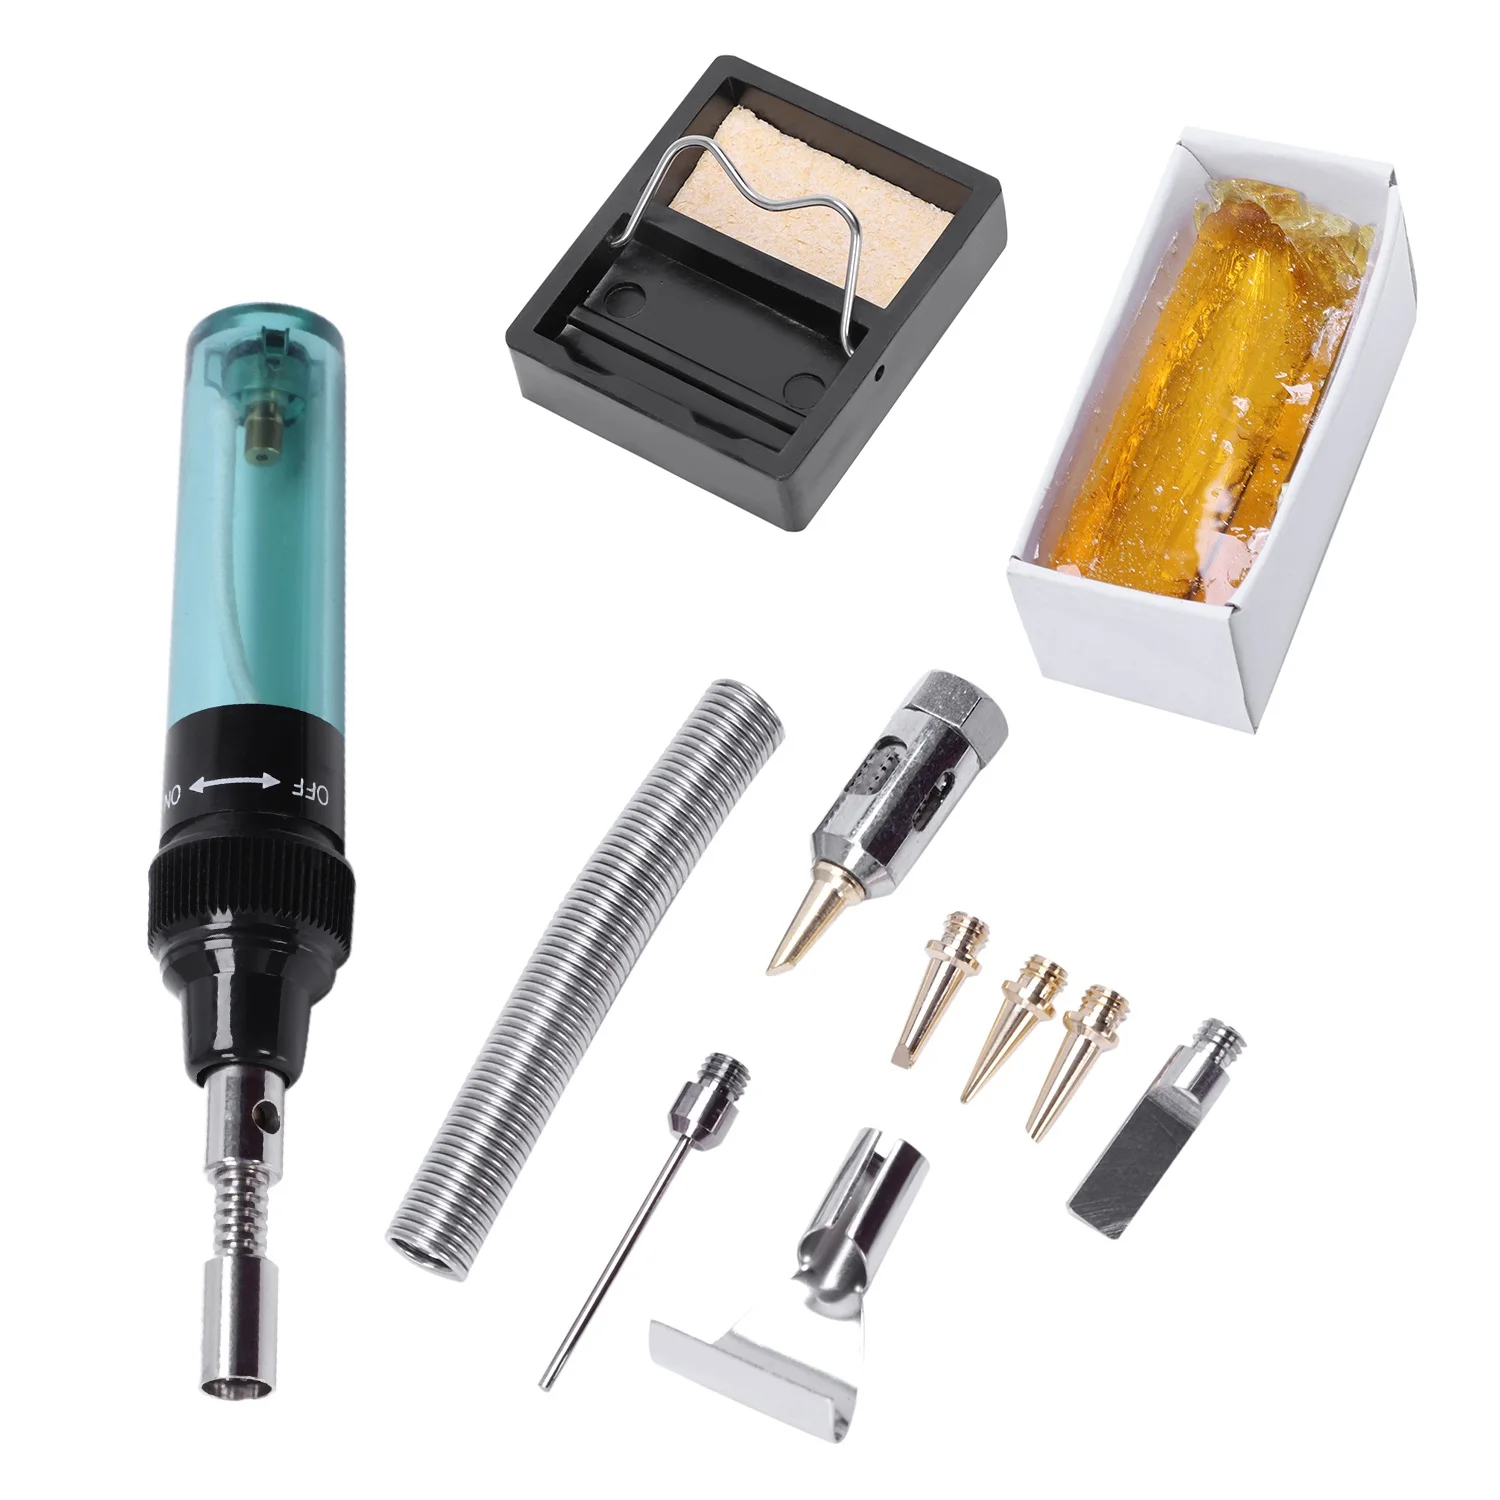 

Gas Soldering Iron MT-100 Electric Soldering Iron Blow Torch Welding Tools